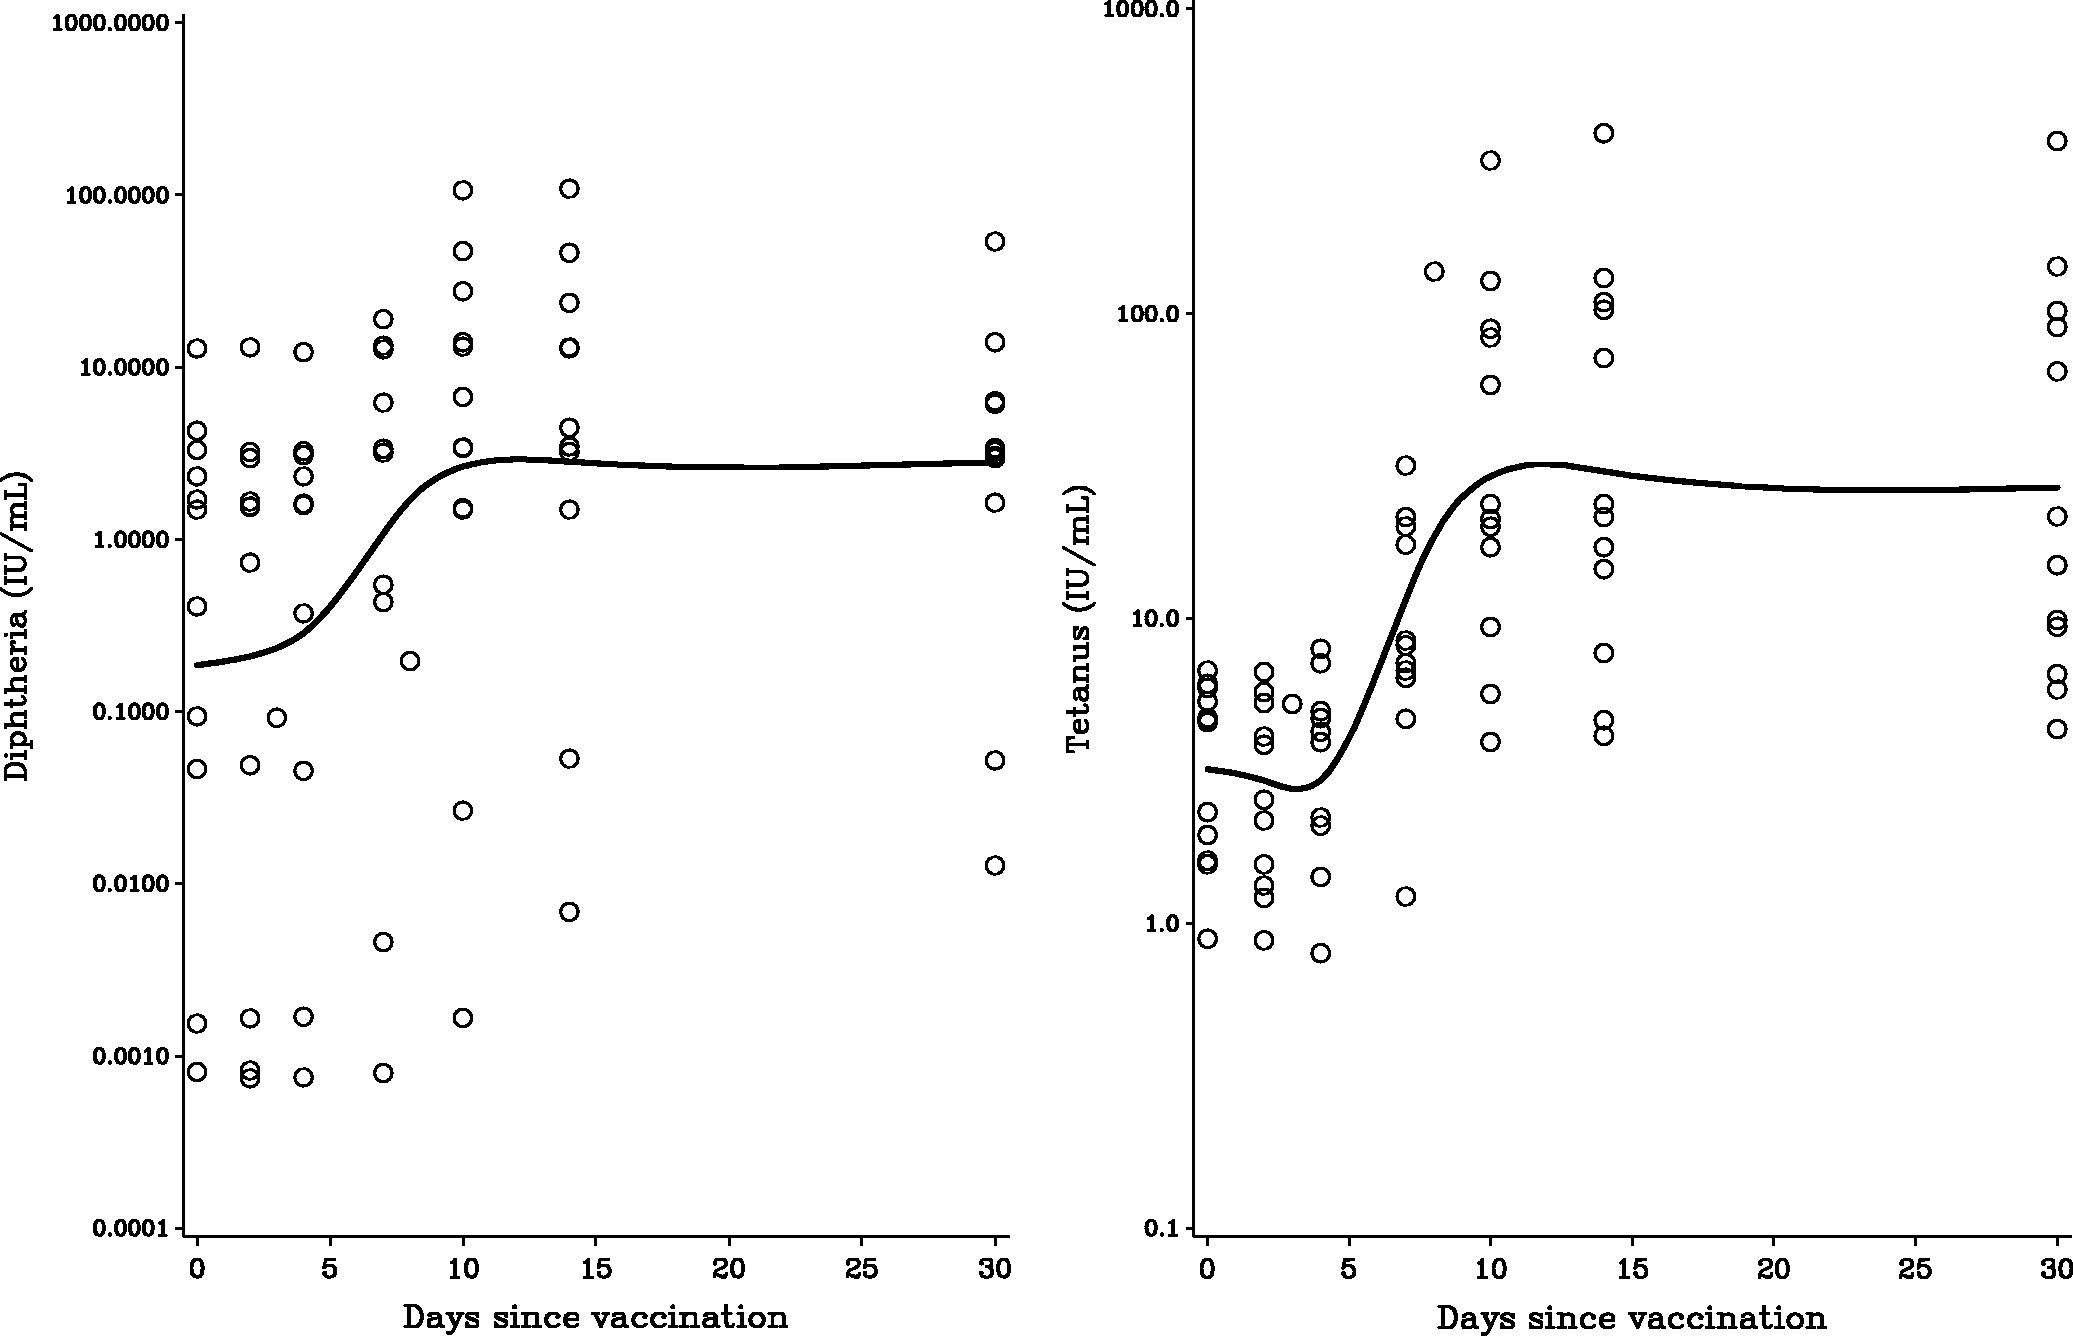 Figure 1. Time-dependent change in serum antibody concentrations against (a) diphtheria and (b) tetanus after vaccination, as modeled by a cubic spline function.